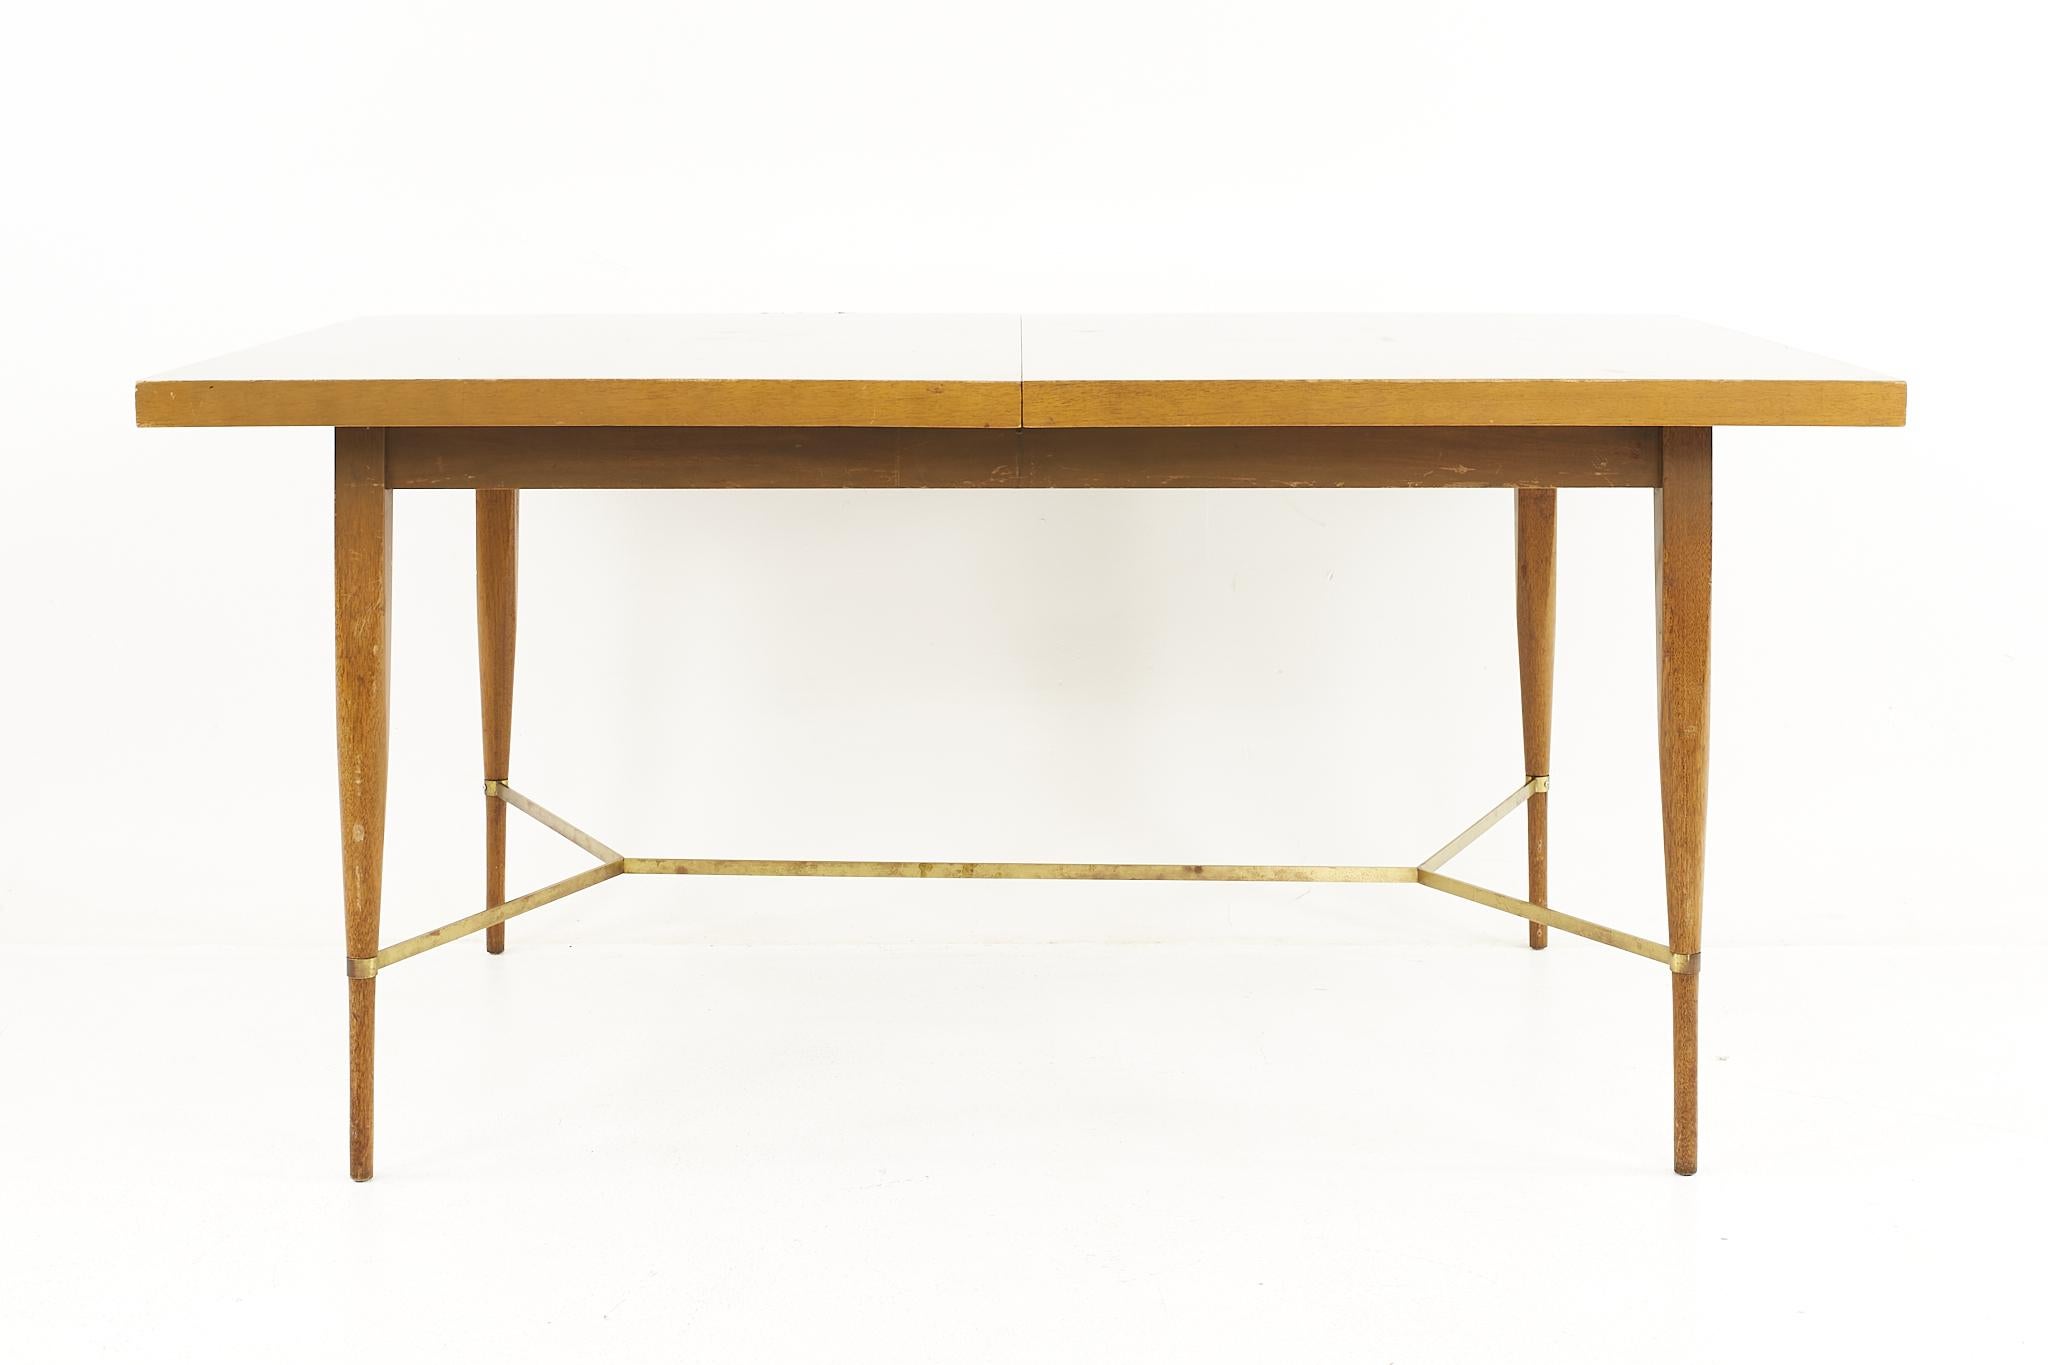 Paul McCobb for Calvin Mid Century Mahogany and Brass Expanding Dining Table

The table measures: 60 wide x 38 deep x 28.75 high, with a chair clearance of 24.5 inches; each leaf is 12 inches wide, making a maximum table width of 84 inches when